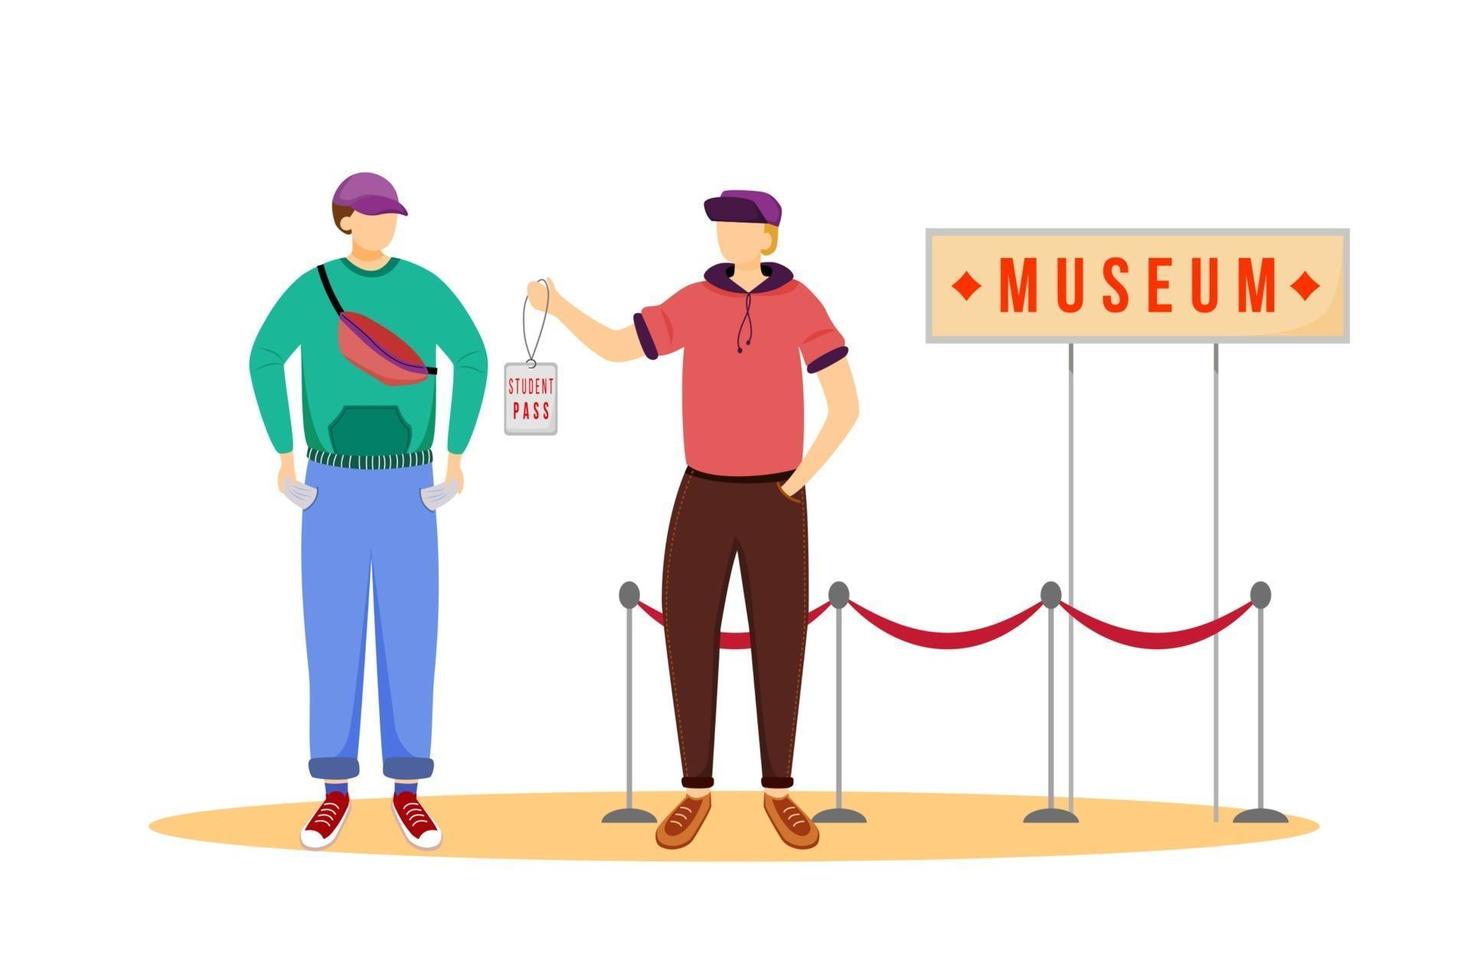 Student pass for museums flat vector illustration. Cheap travelling ideas. Discount for students. Free entrance for youth. Budget tourism isolated cartoon character on white background